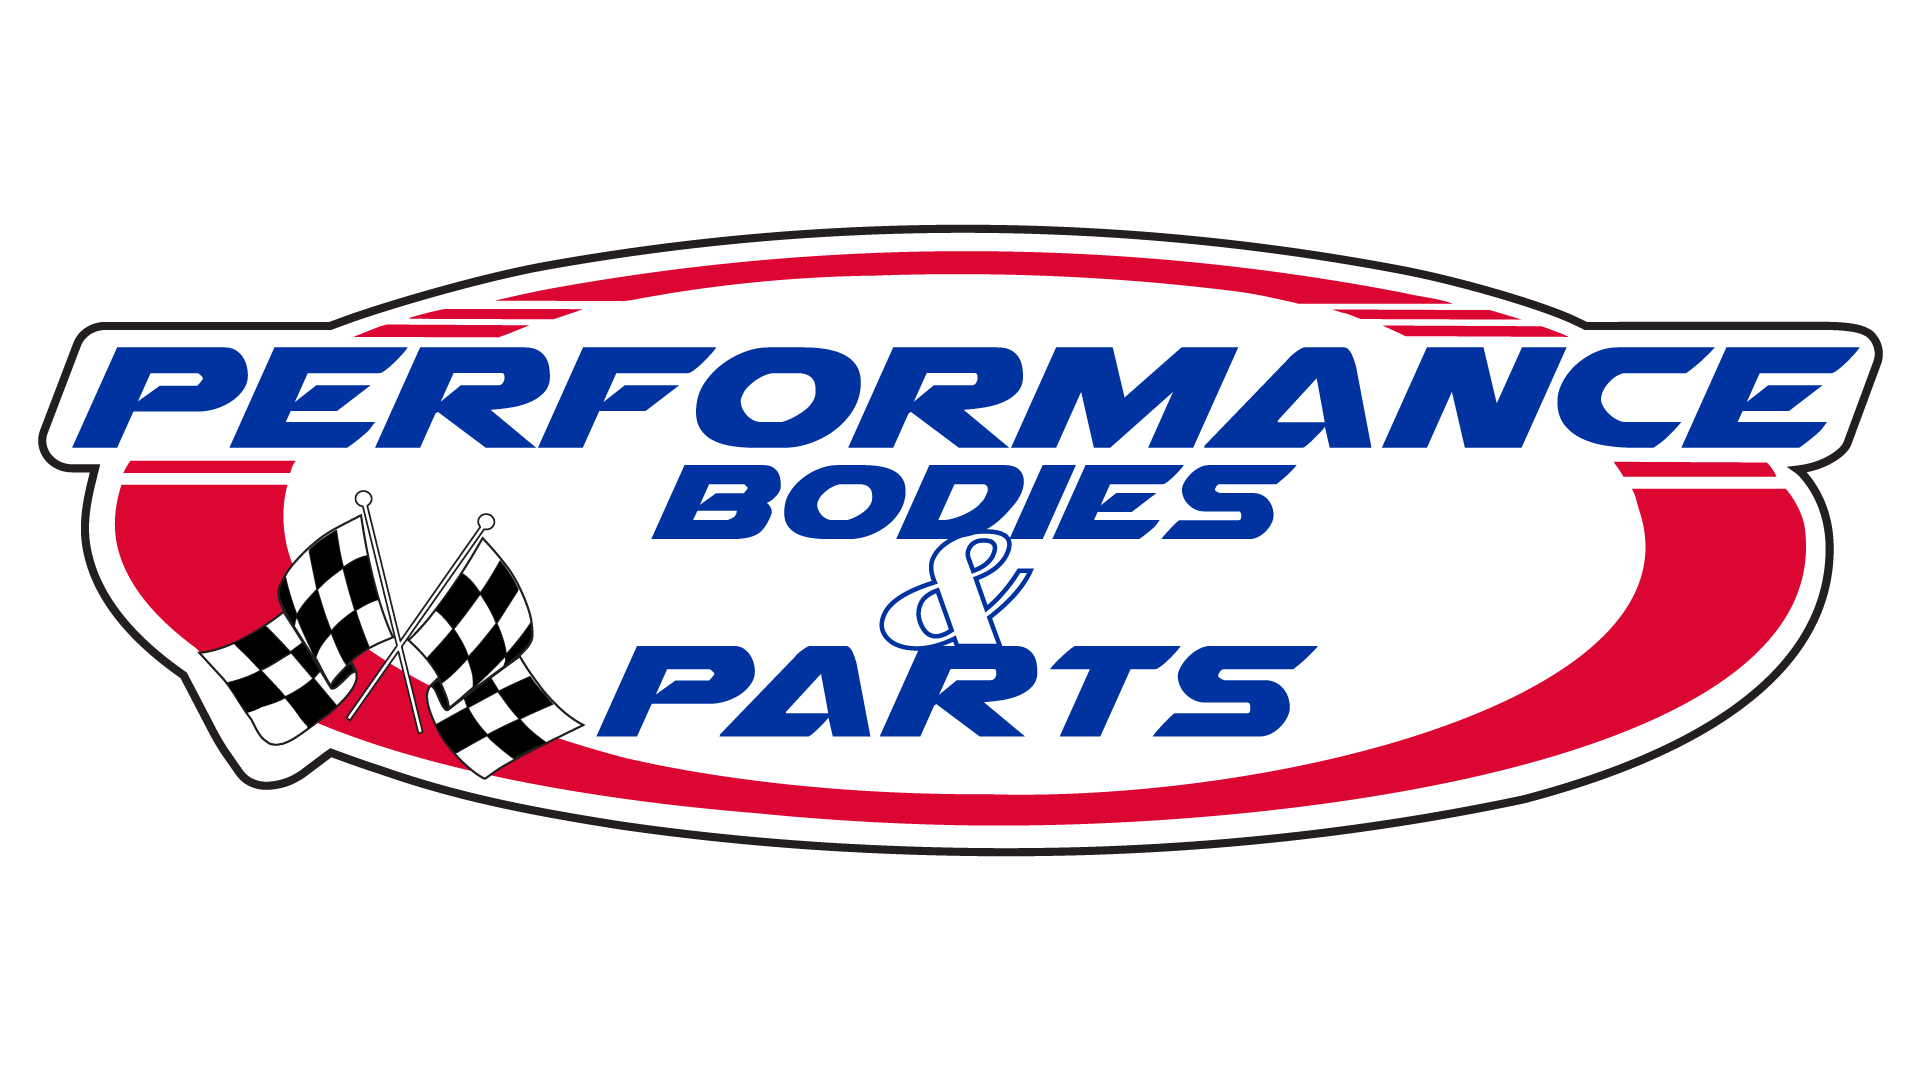 Performance Bodies & Parts logo. Click to be redirected to home page.